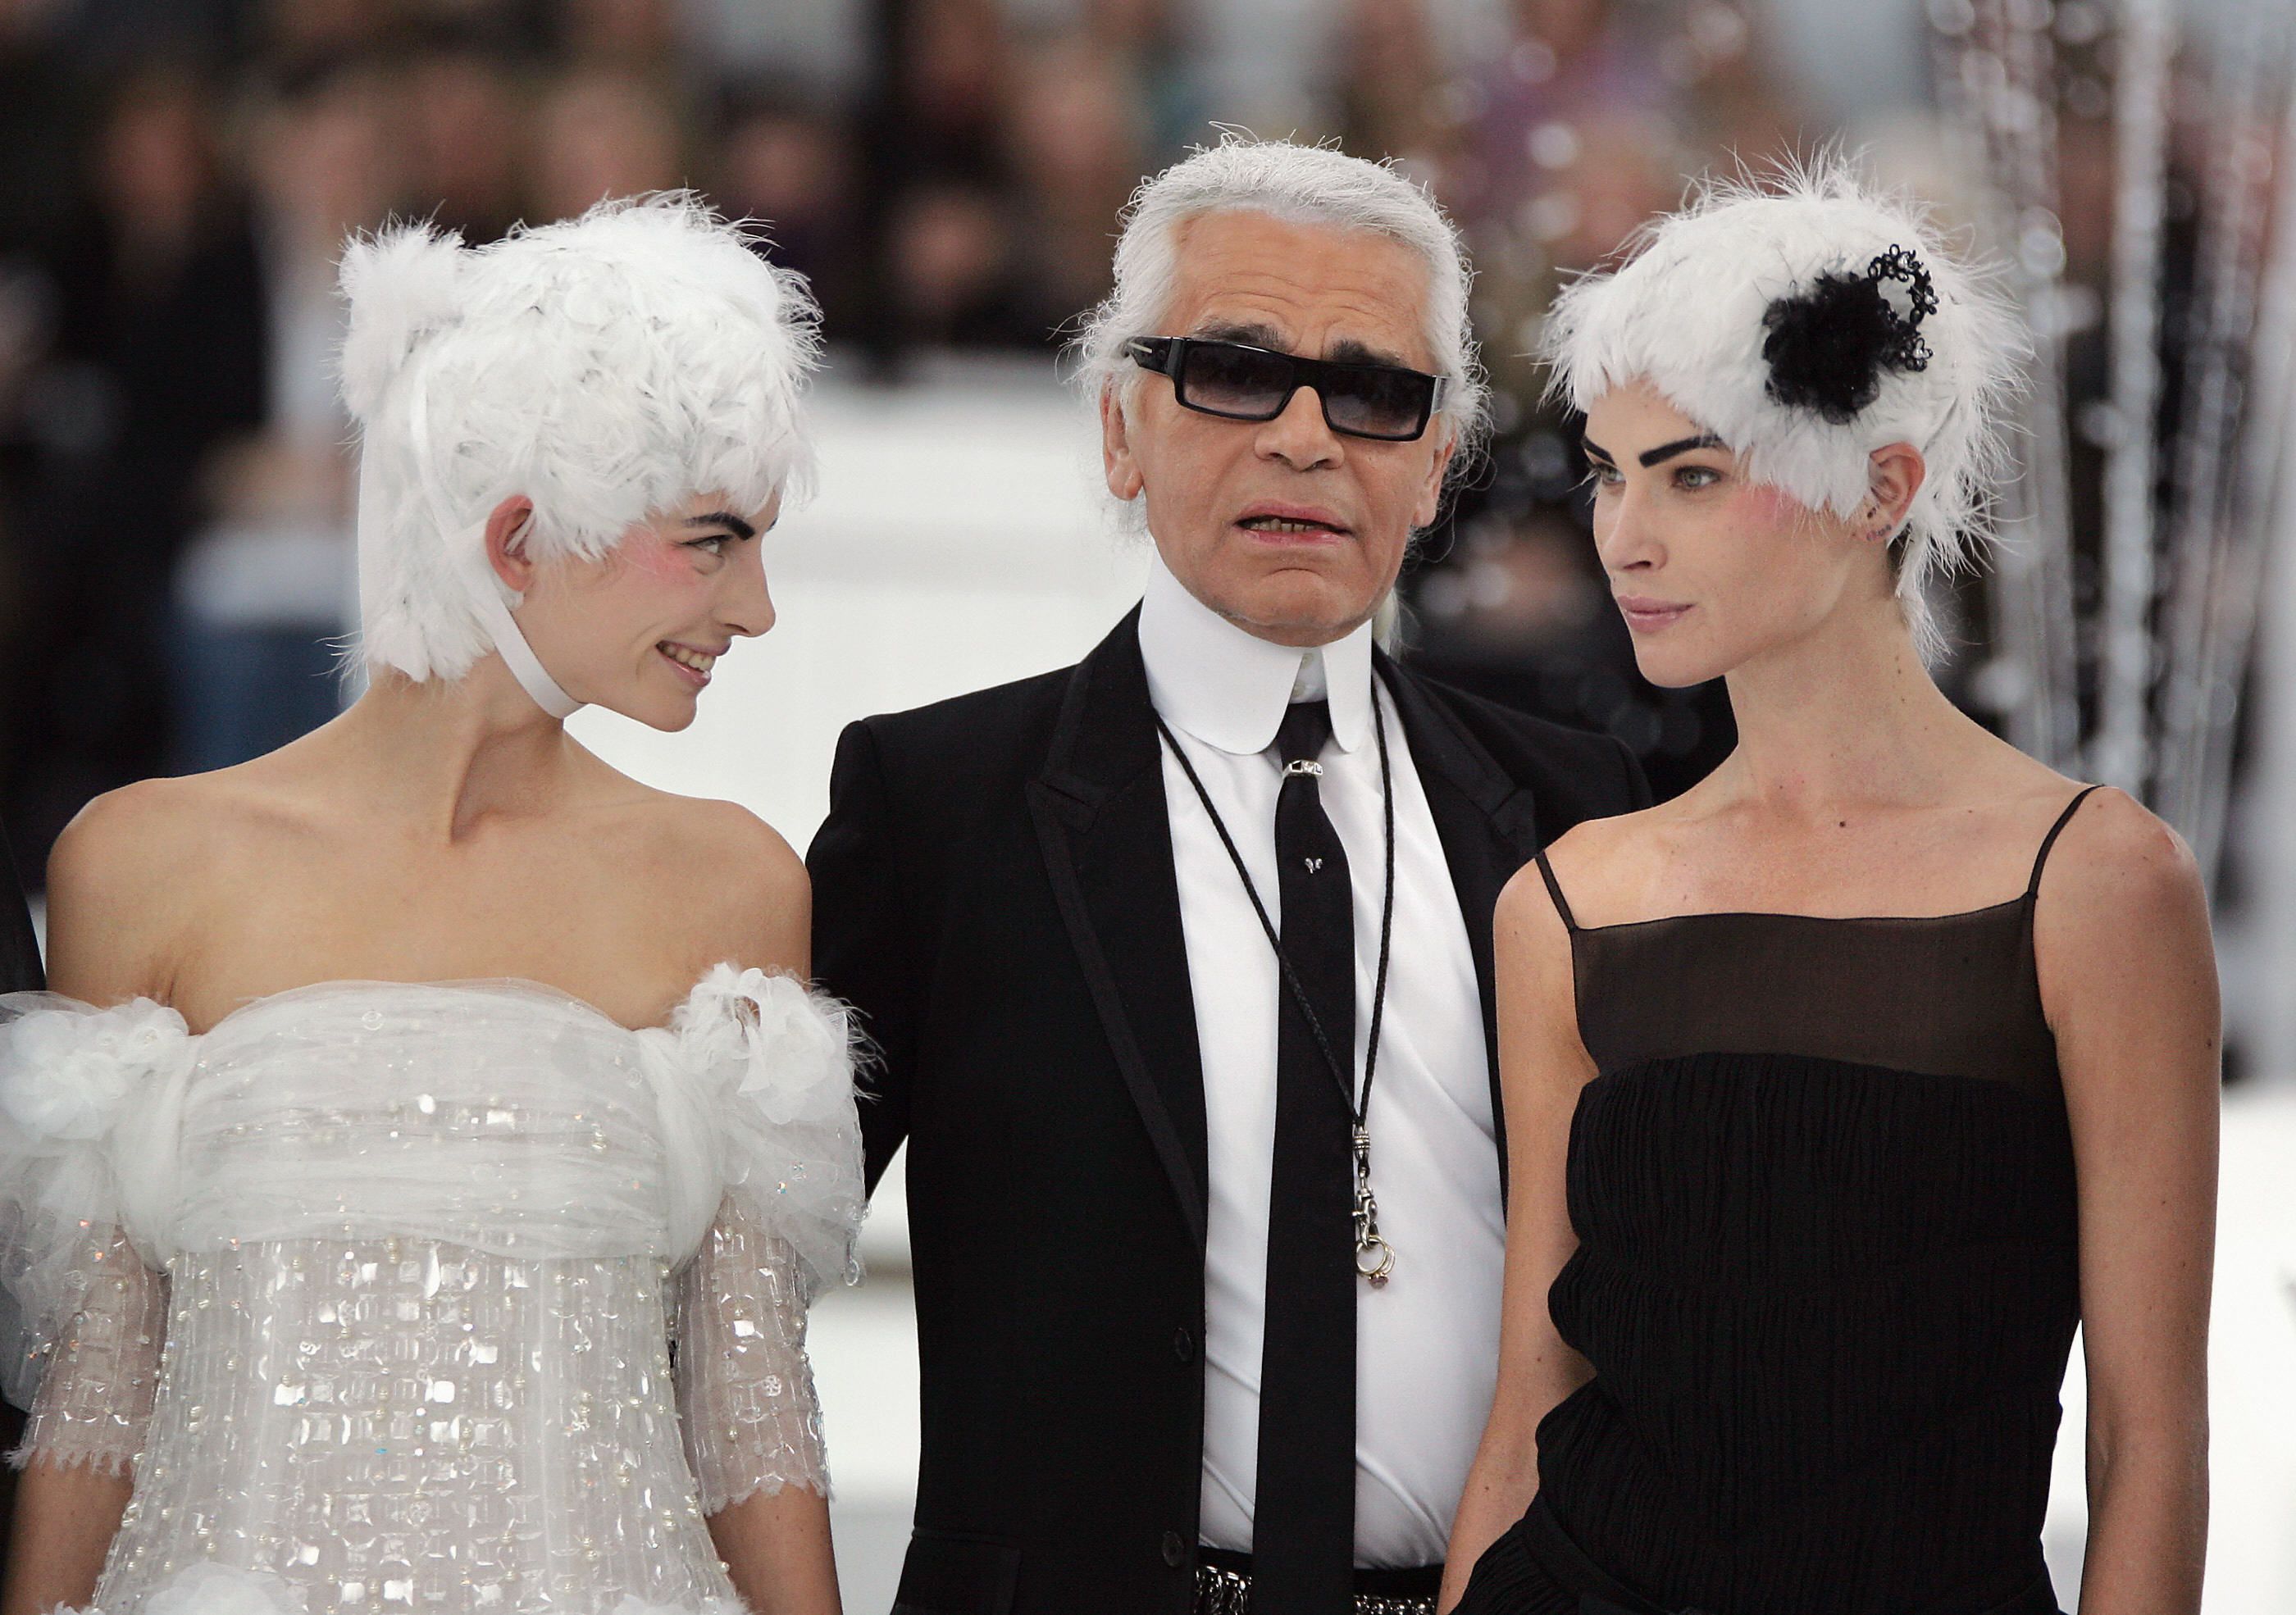 Met Gala Honouring Karl Lagerfeld Despite Controversy, Complex